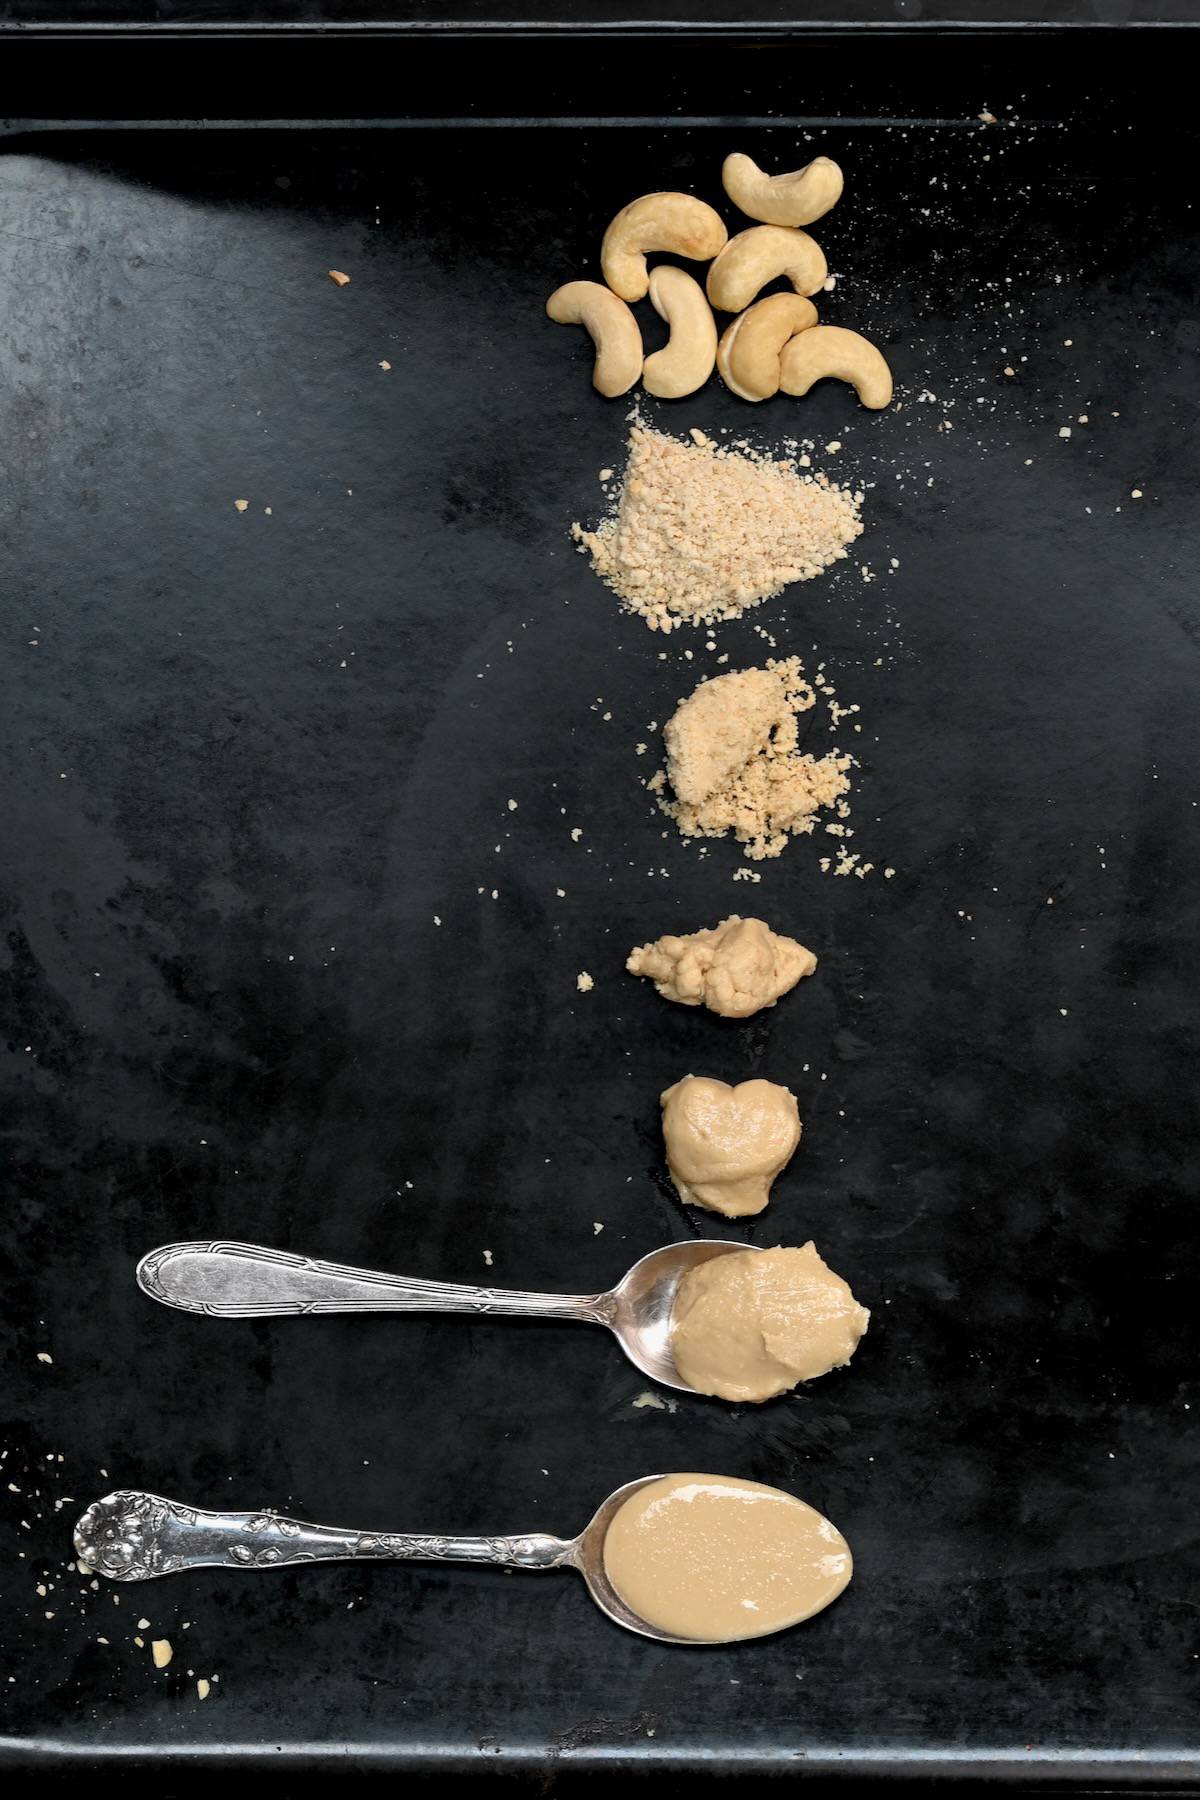 Different stages of blending roasted cashews - from flour to runny butter